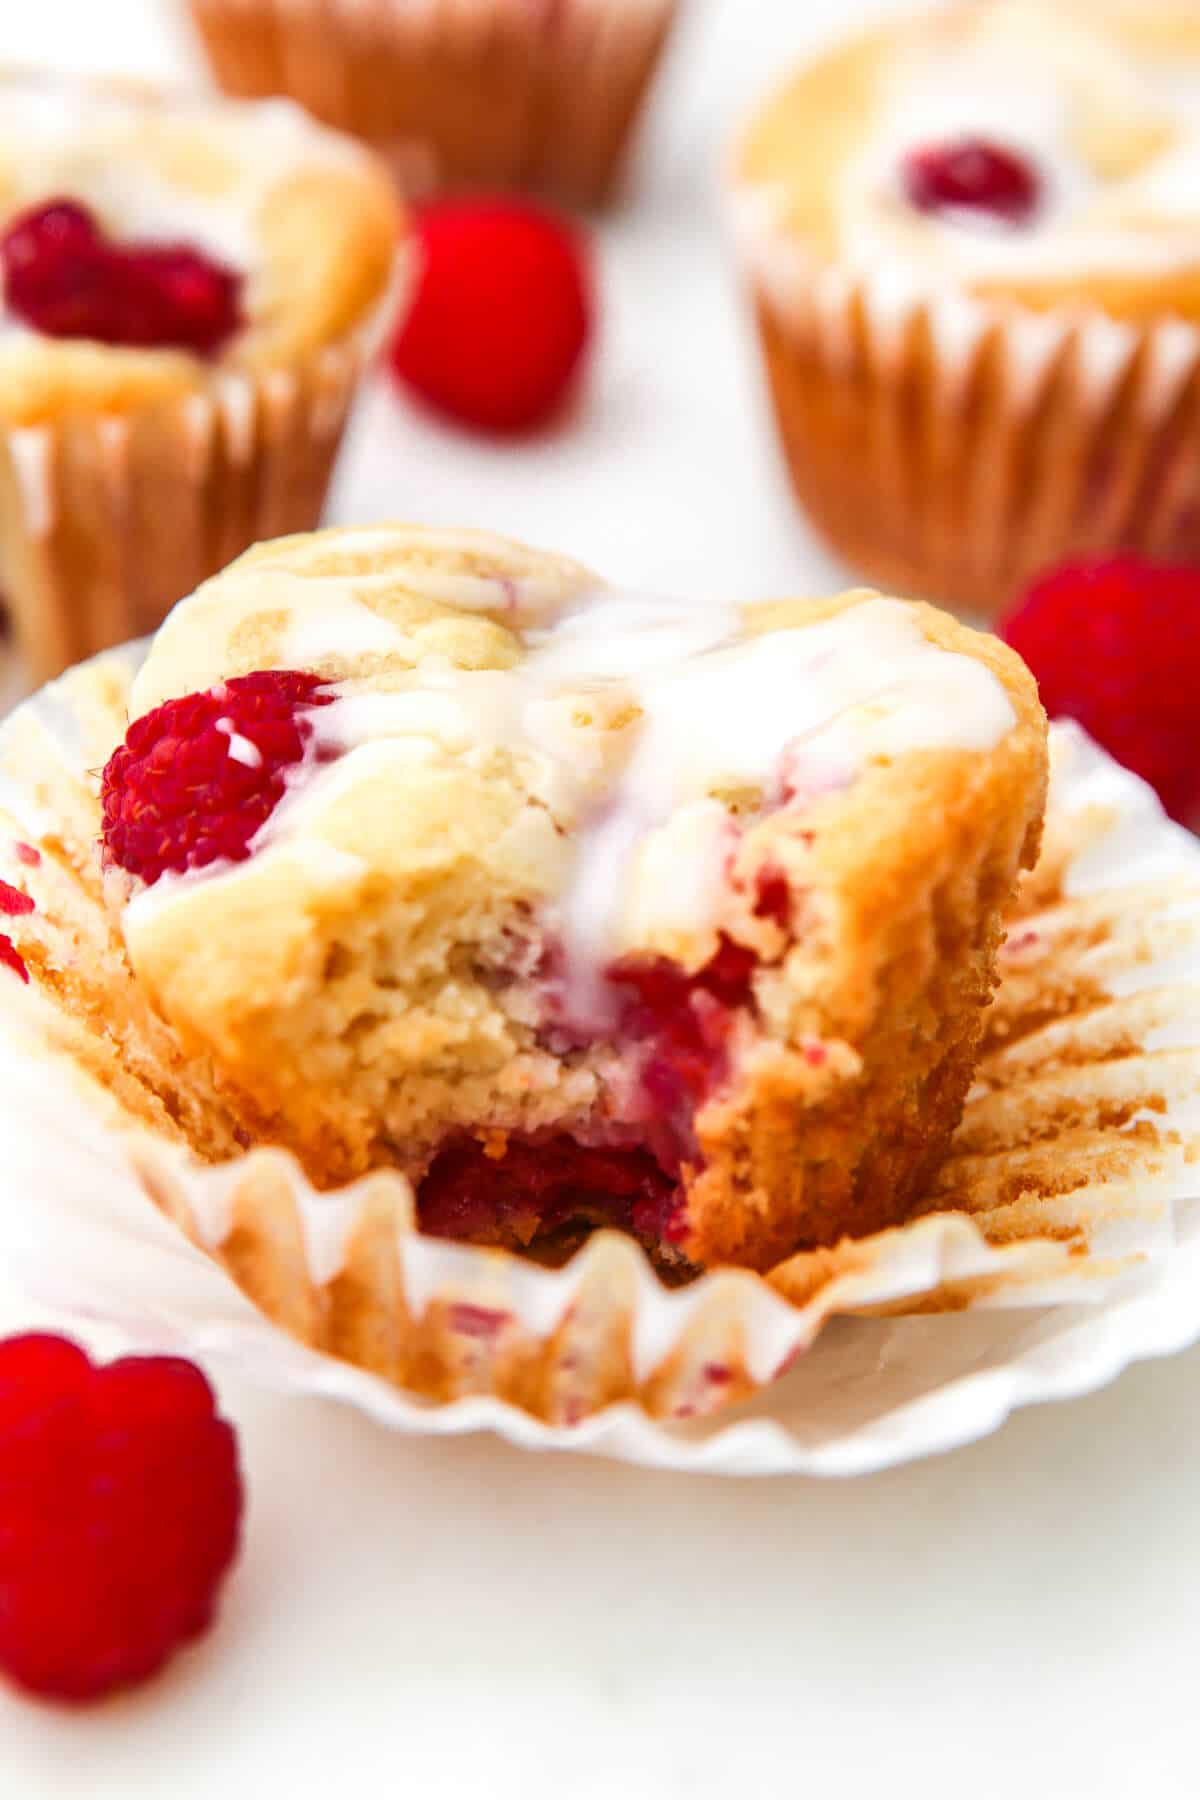 A vegan raspberry muffin with a bite taken out of it.